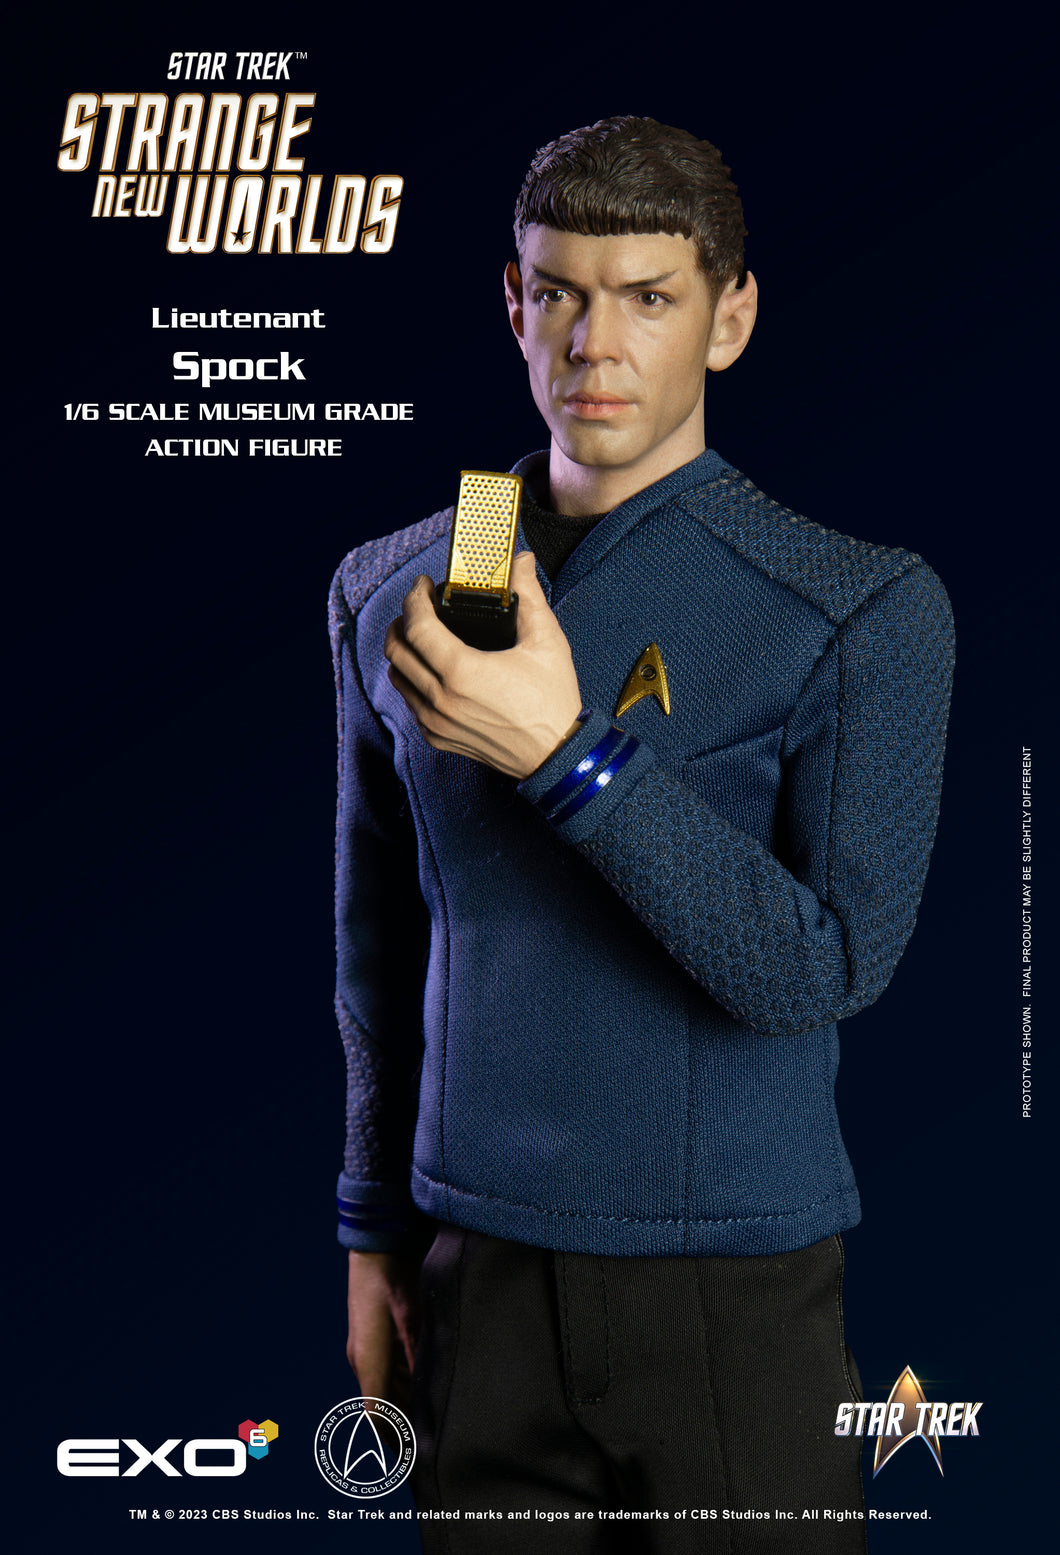 SNW Lt Spock  NON REFUNDABLE US$20.00 PRE-ORDER DEPOSIT (Final Amount due $225 + $25 shipping) Pre-Order Ended